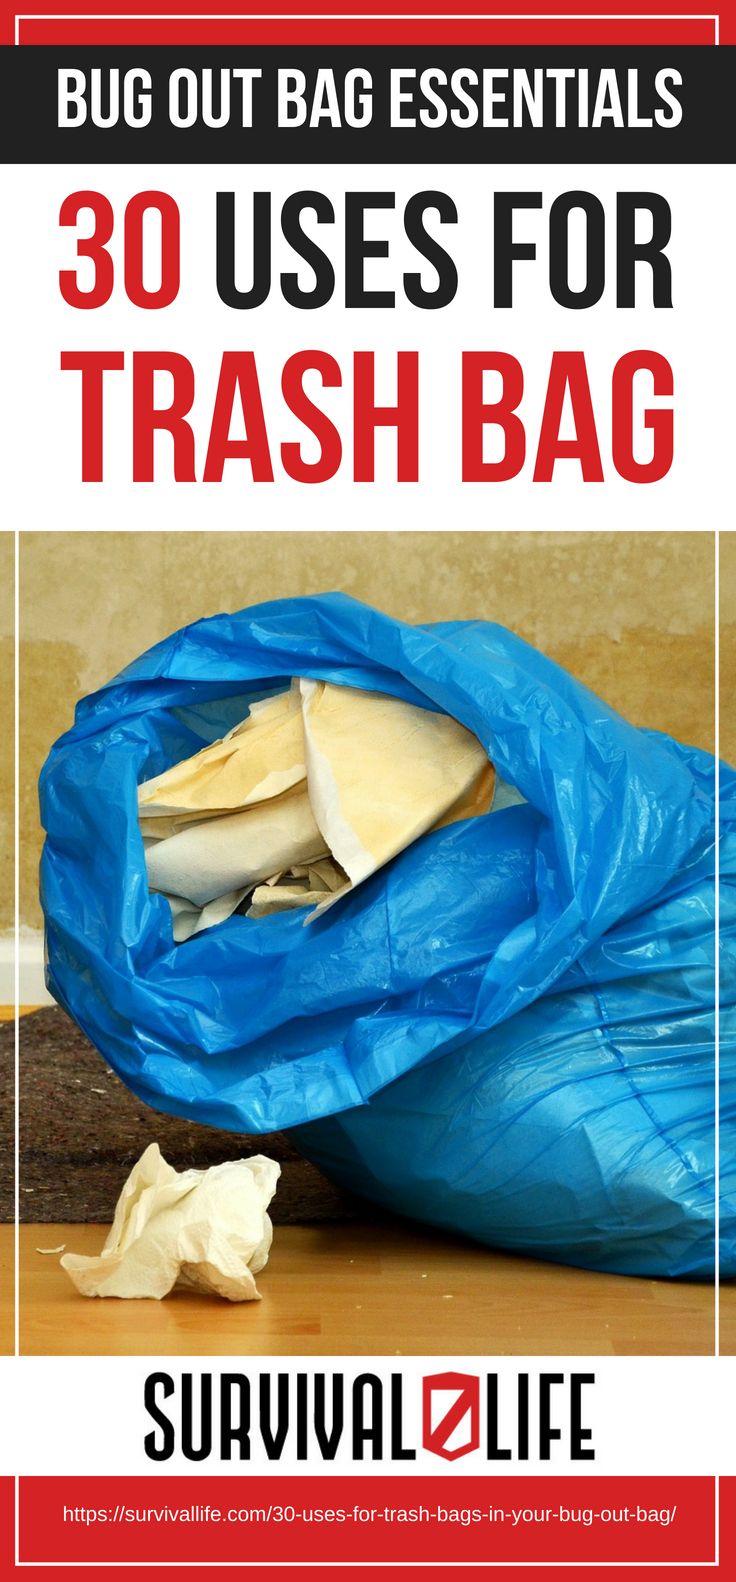 Uses For Trash Bags | Bug Out Bag Essentials | https://survivallife.com/30-uses-for-trash-bags-in-your-bug-out-bag/